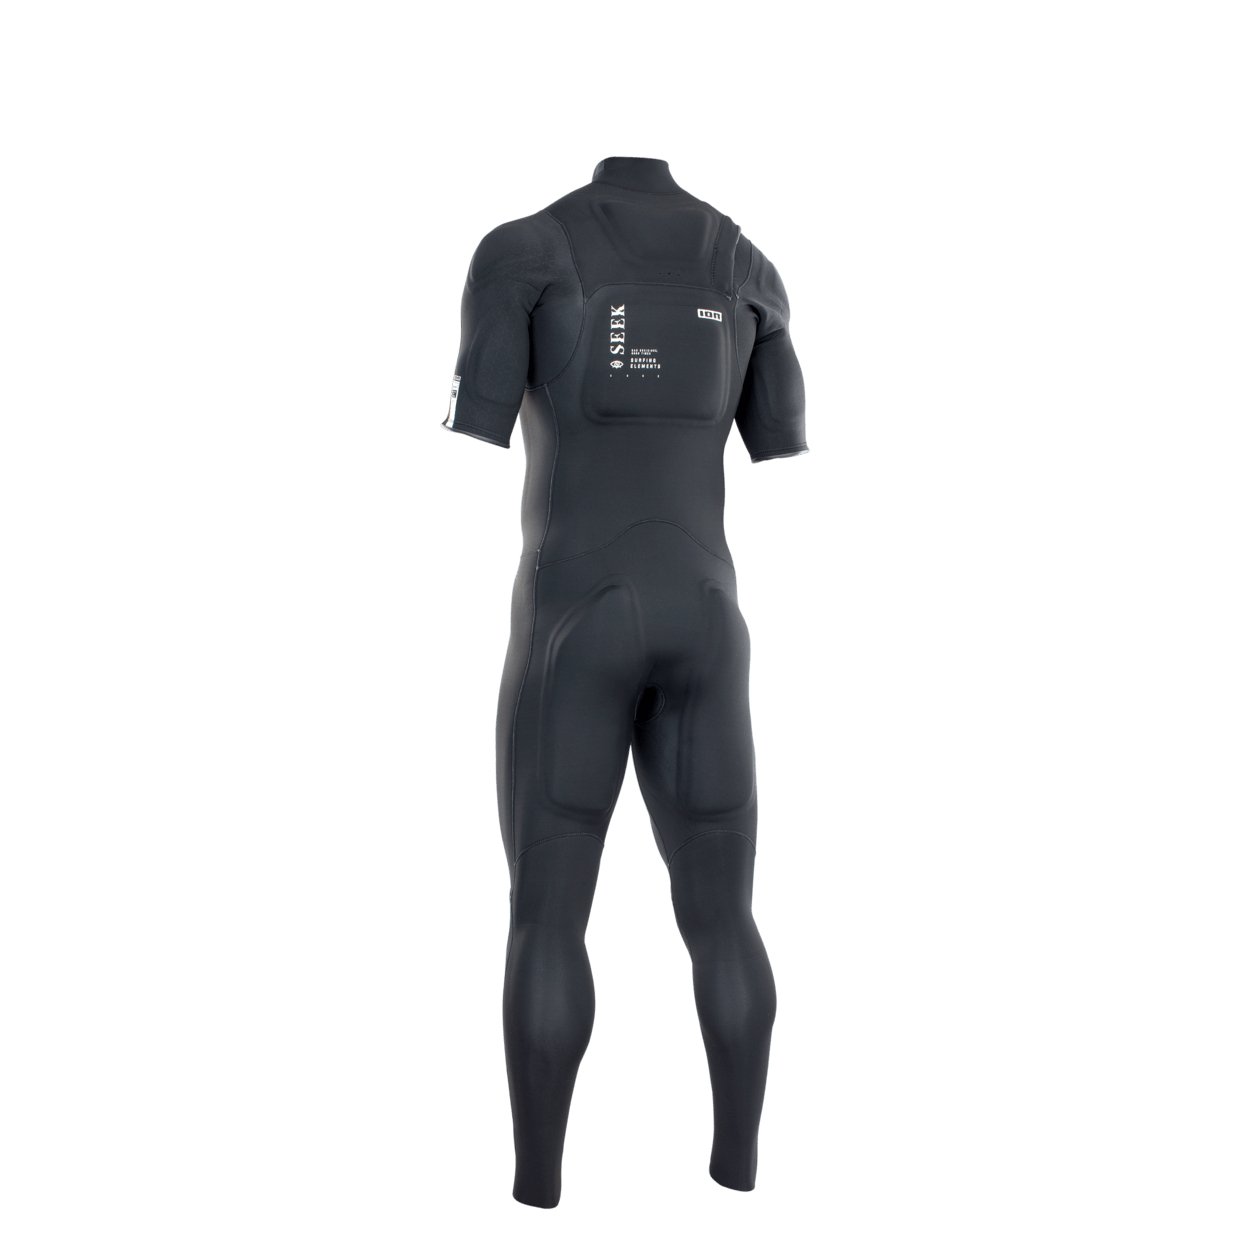 ION Protection Suit 3/2 SS Front Zip 2022 - Worthing Watersports - 9010583070247 - Wetsuits - ION Water